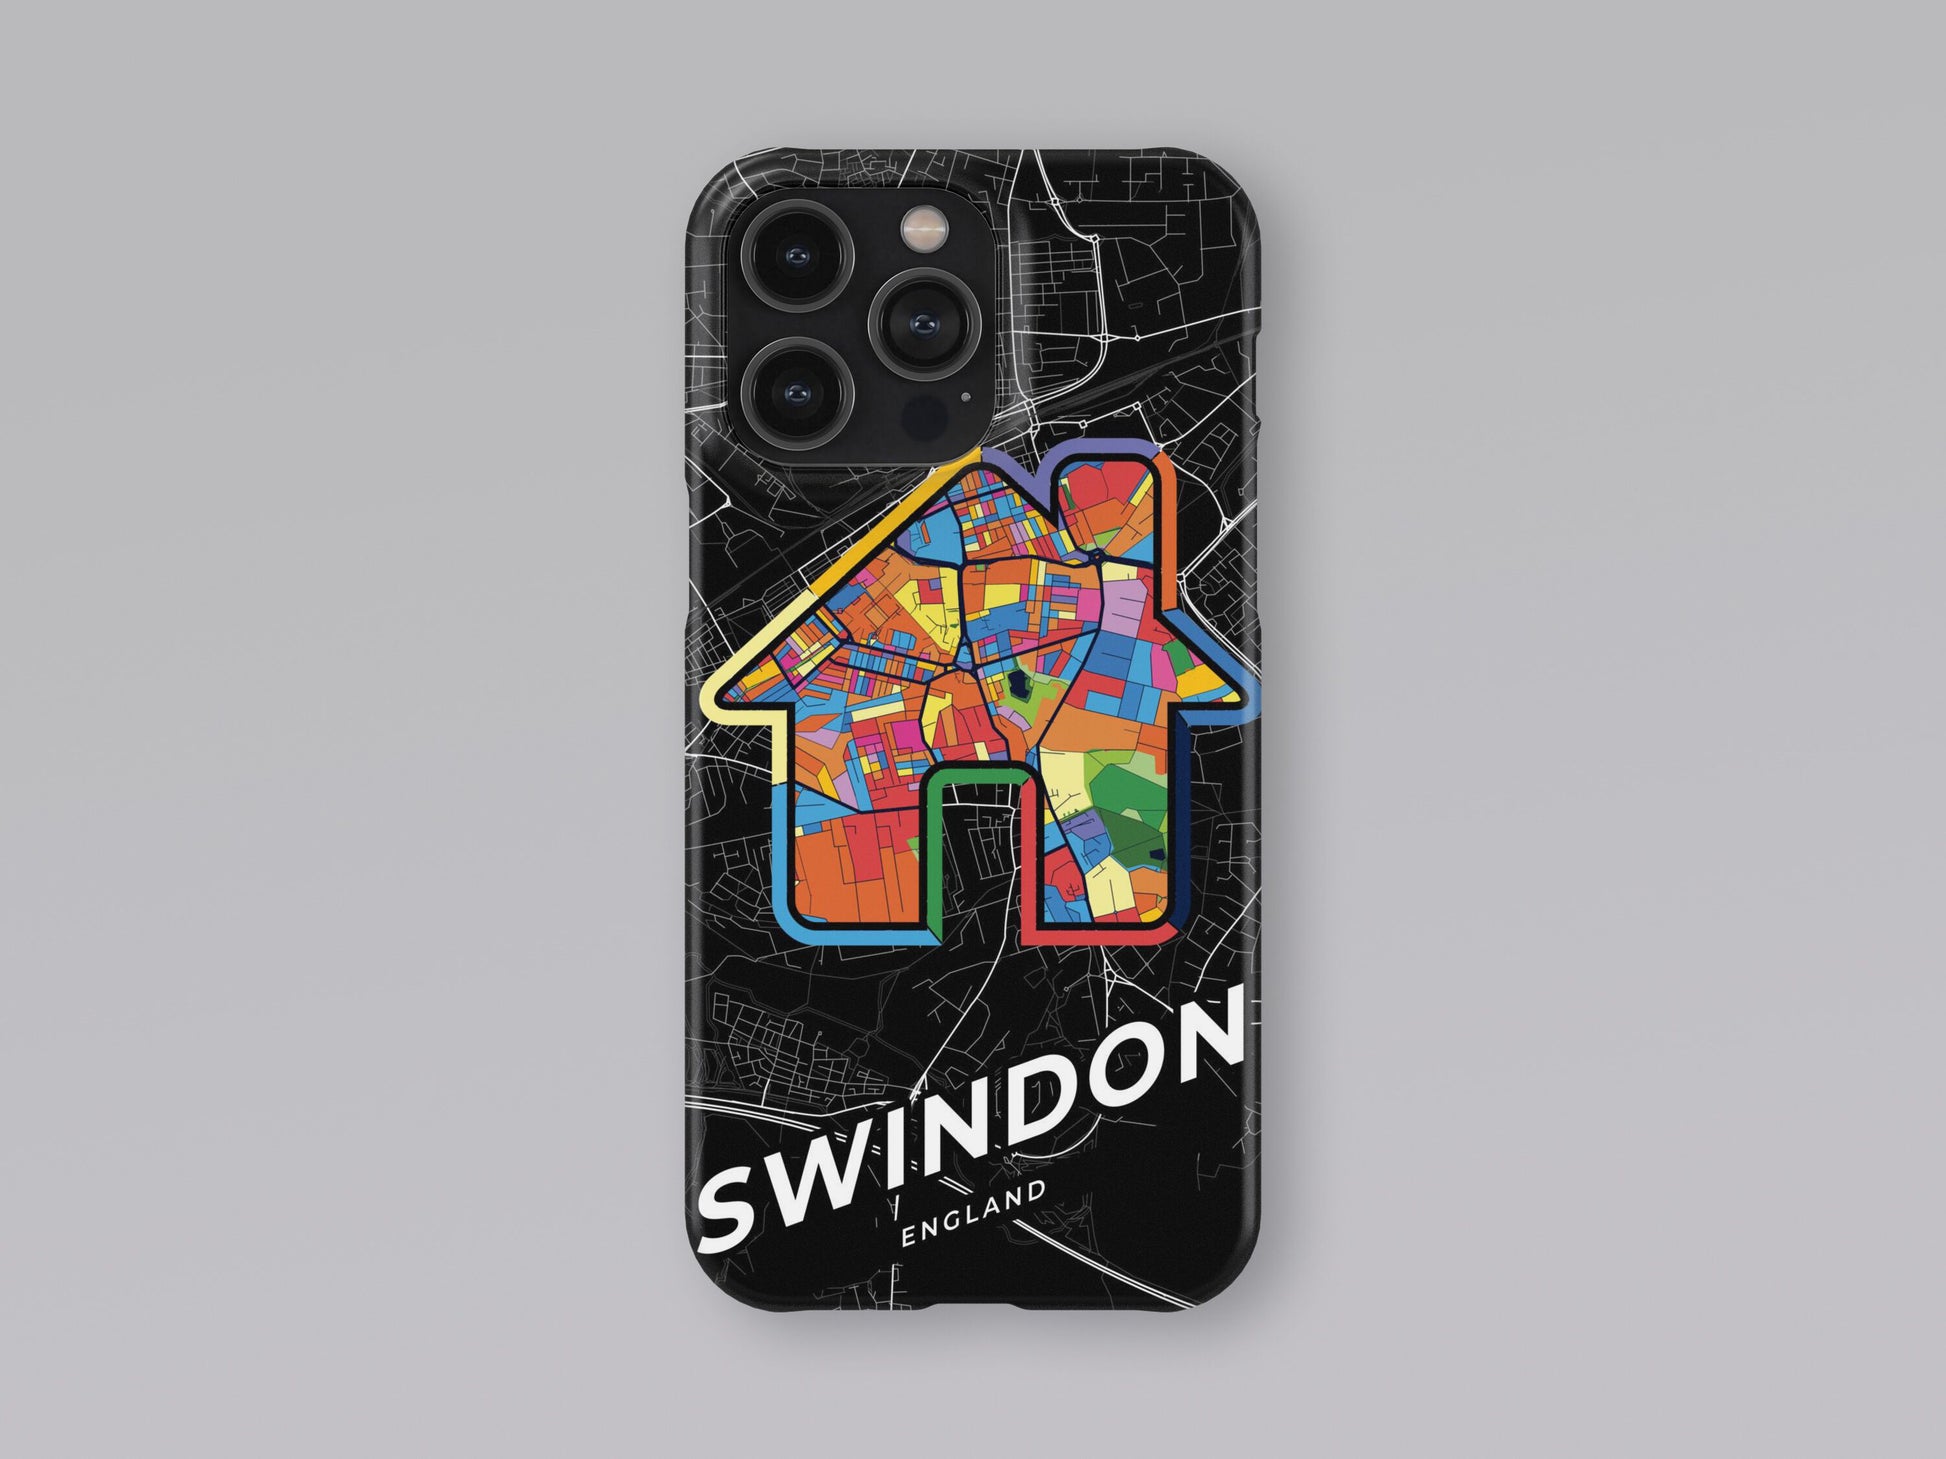 Swindon England slim phone case with colorful icon 3